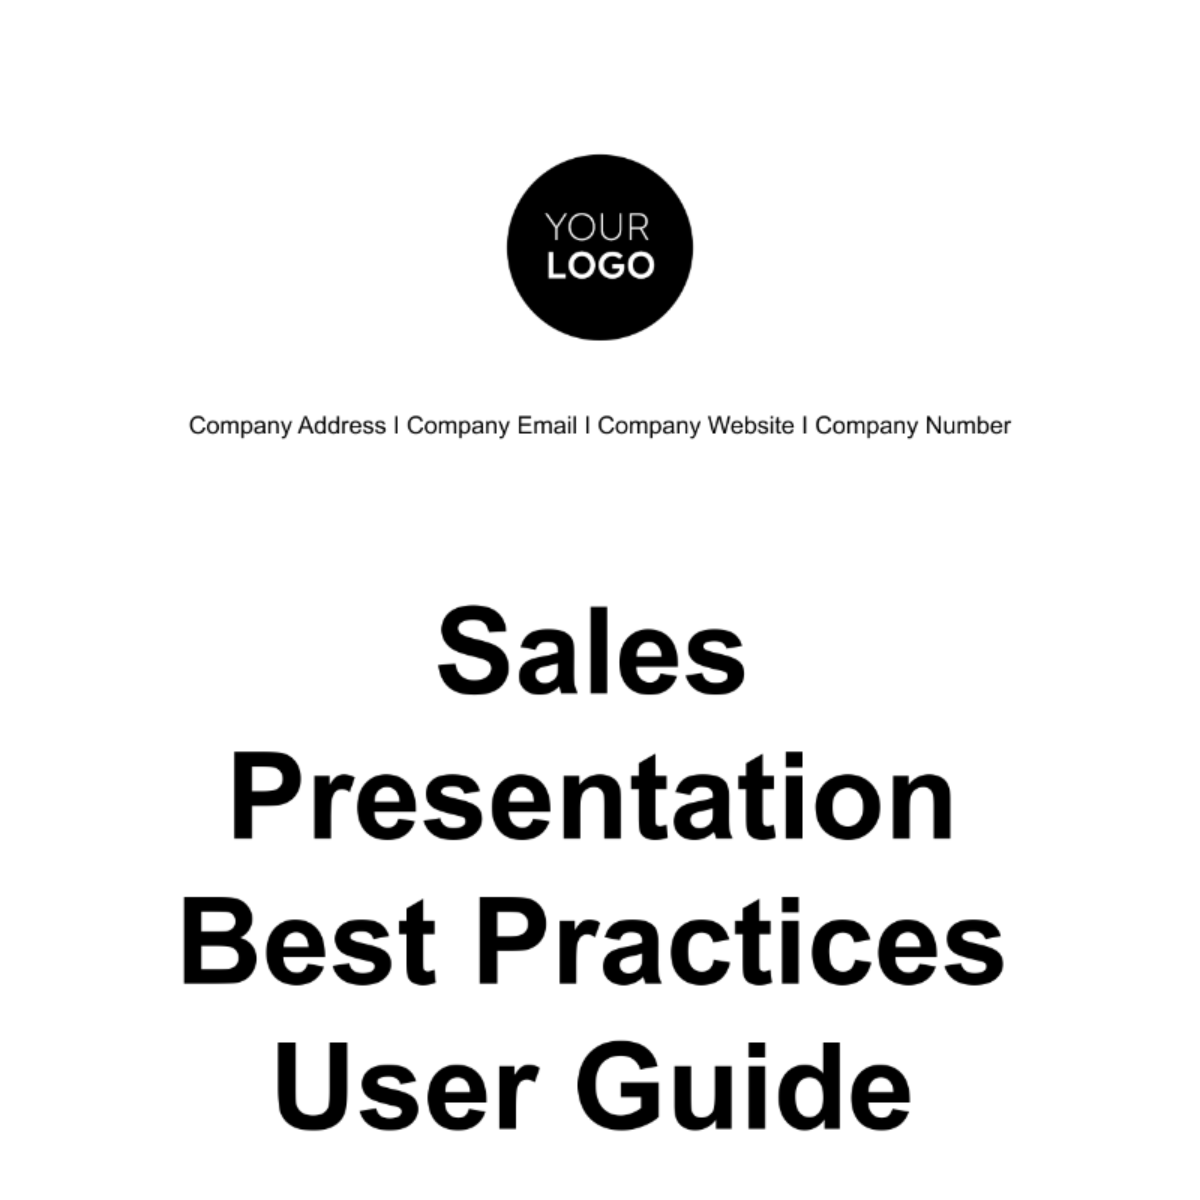 Sales Presentation Best Practices User Guide Template